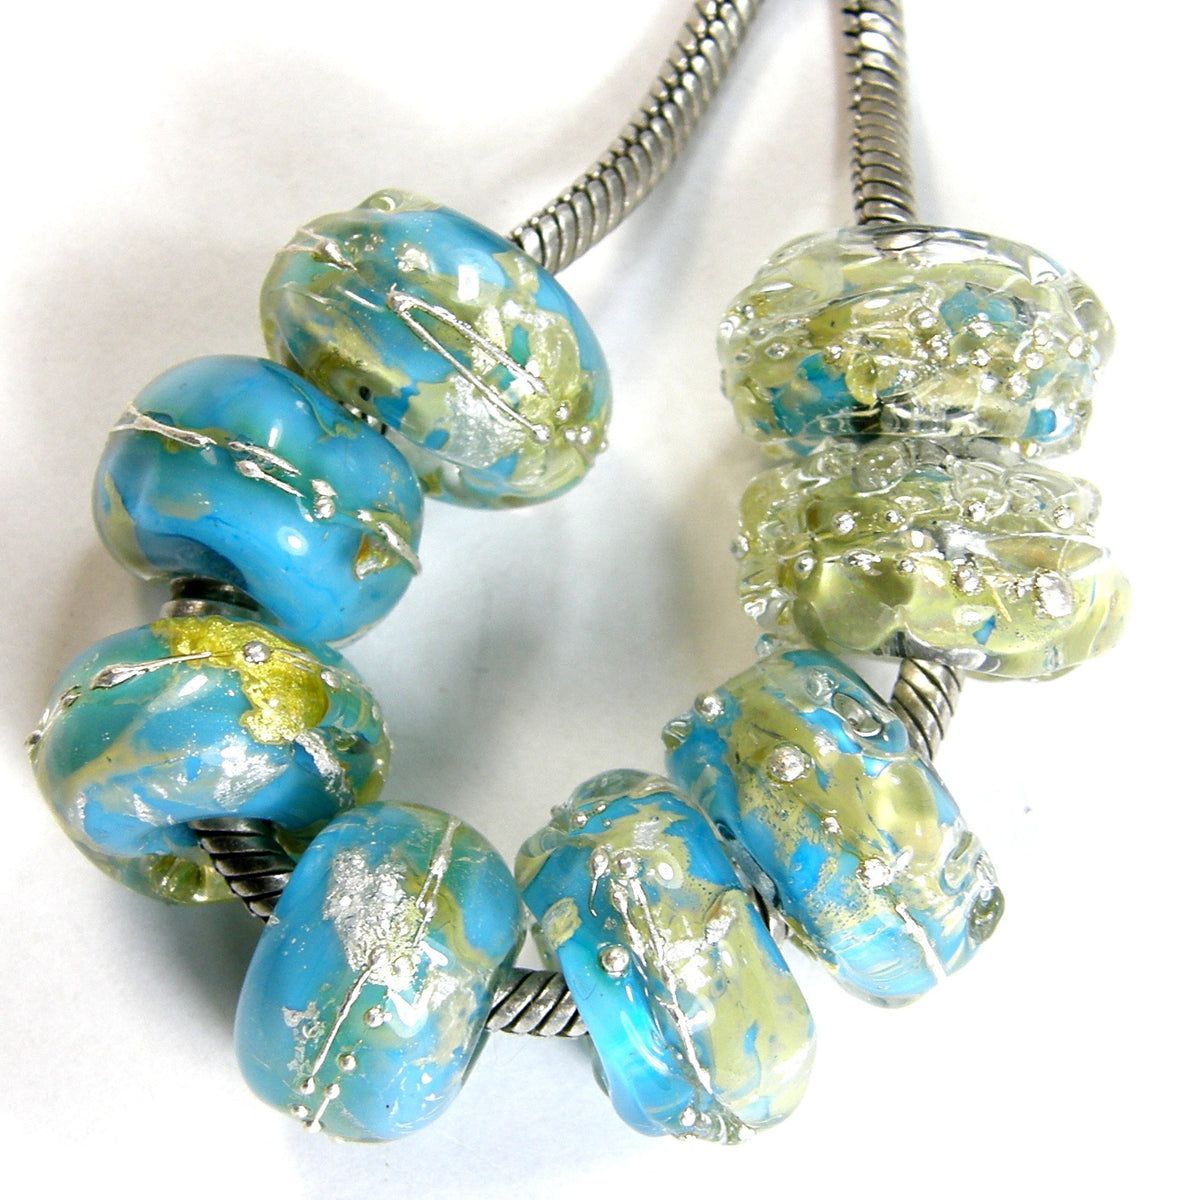 #Handmade #LargeHole #Lampwork #Beads, Glass Charms Nuggets #Turqouise Ice Silver covergirlbeads.com/products/handm… #cctag   #LargeHoleBeads #LampworkBeads #SliderBeads #EuroStyleBeads #BigHoleBeads #LampworkJewelry #EuropeanCharms #BHB #LHB #BraceletBeads #AddABead   @Covergirlbeads